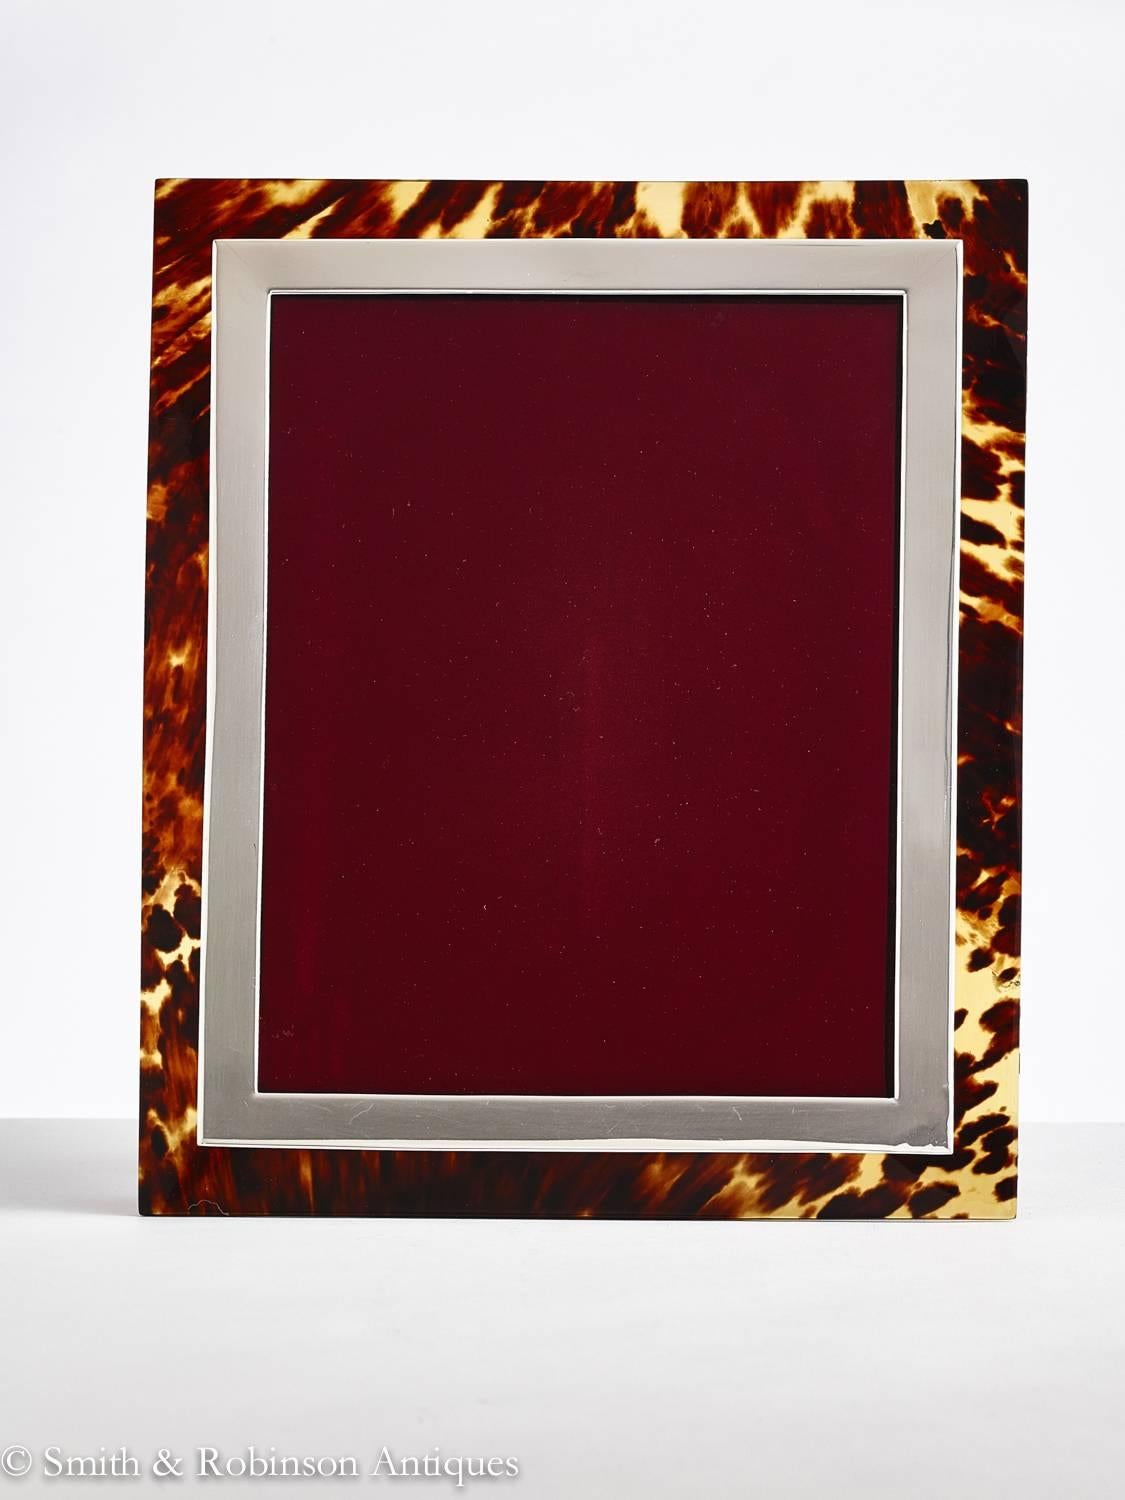 A beautiful Art Deco tortoiseshell photograph frame by Finnigans of New Bond St., London 1922.
The fine shell has a very attractive light and shade patina which looks stunning when back lit.
The cast silver gives adds to the overall quality and it